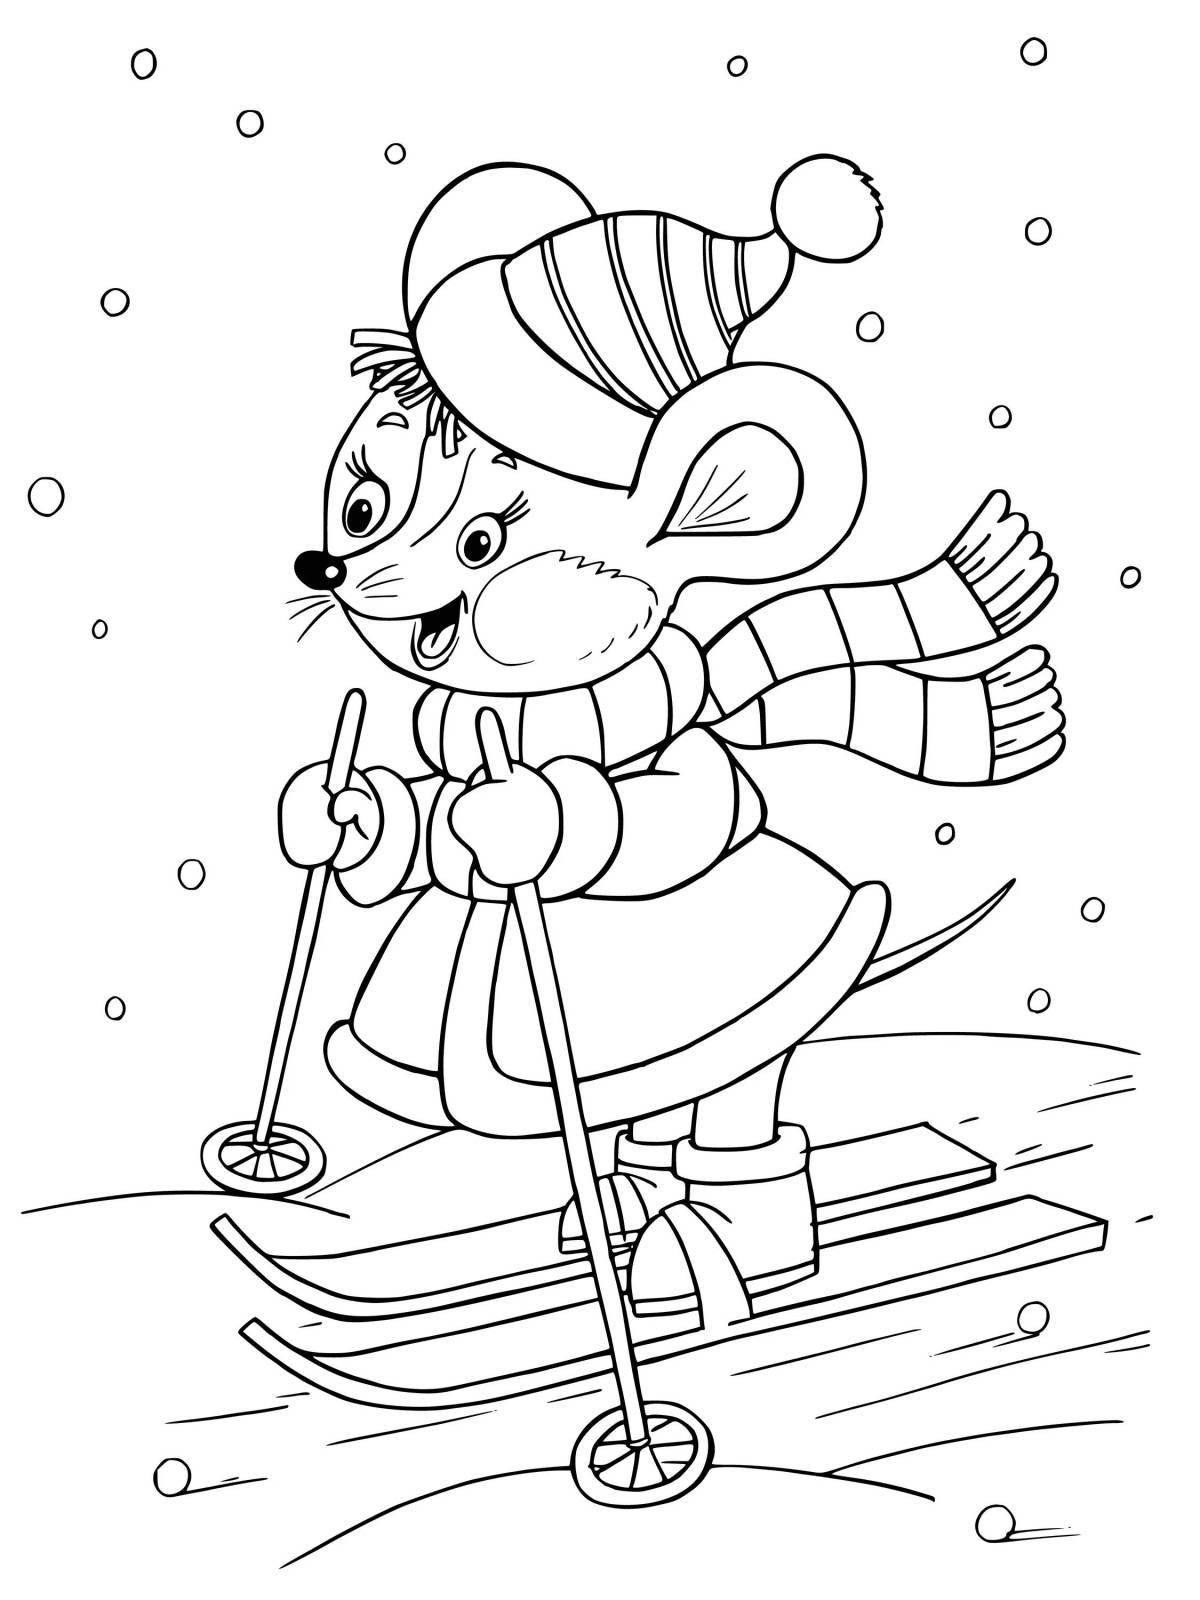 Icicle-decorated mouse in winter